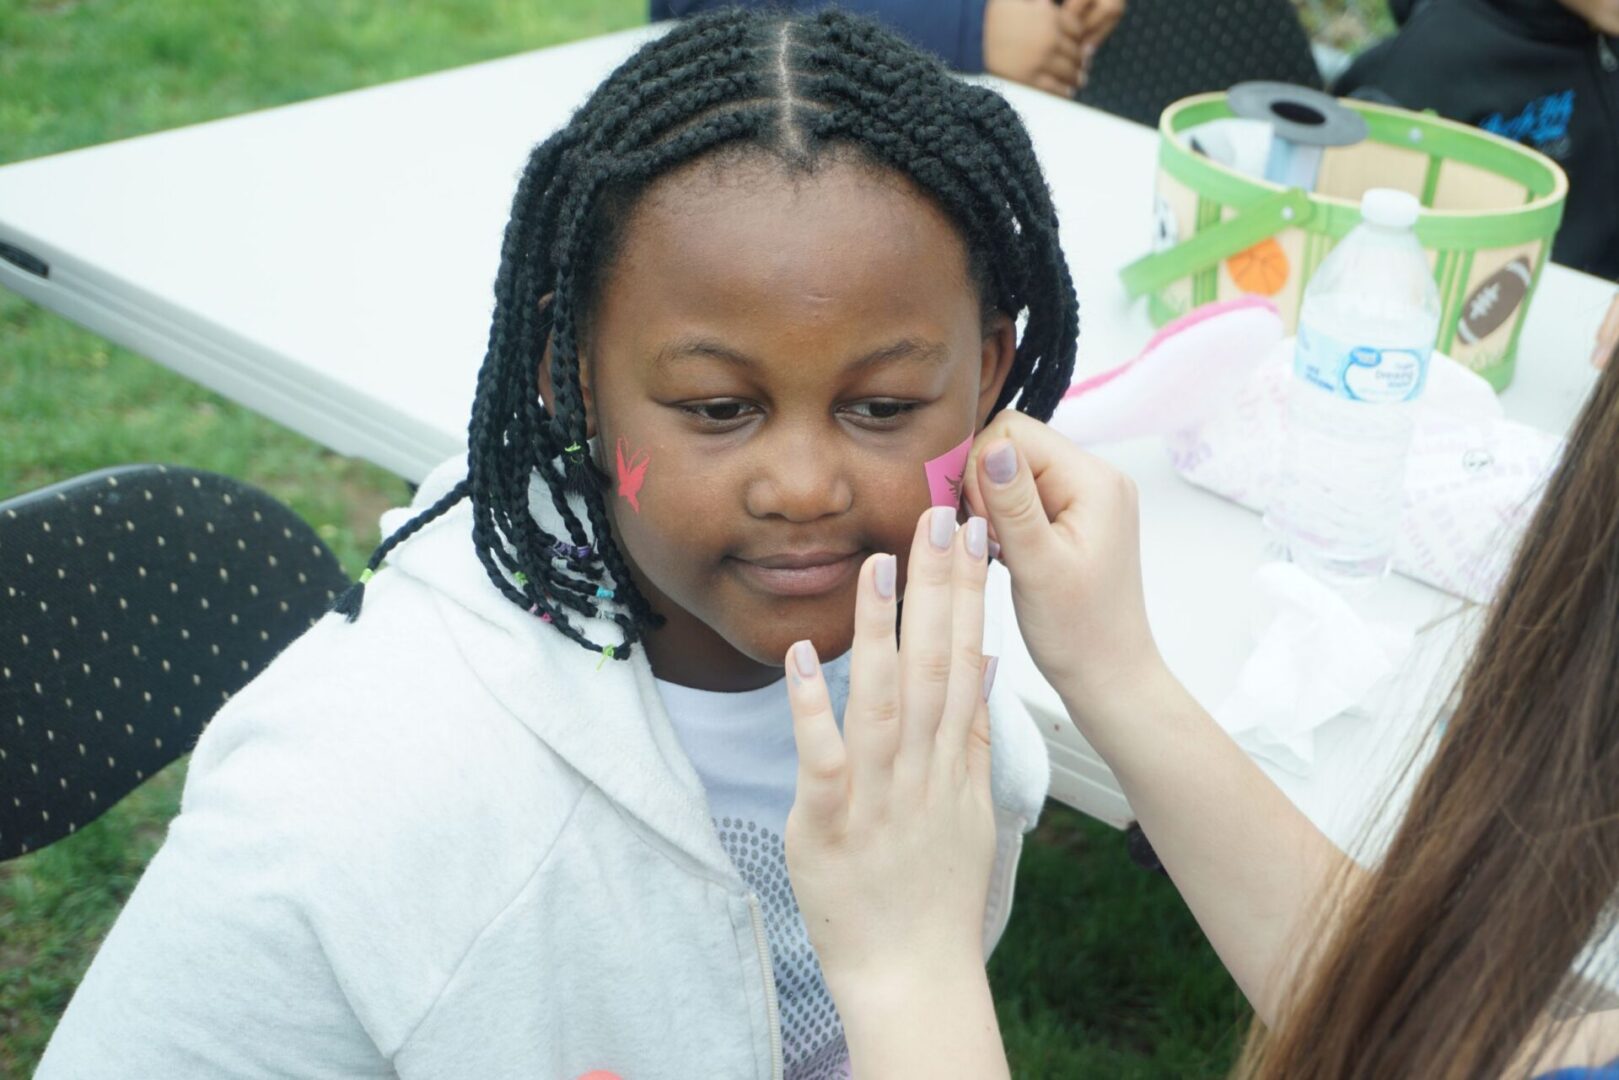 A girl with braided hair getting face painted